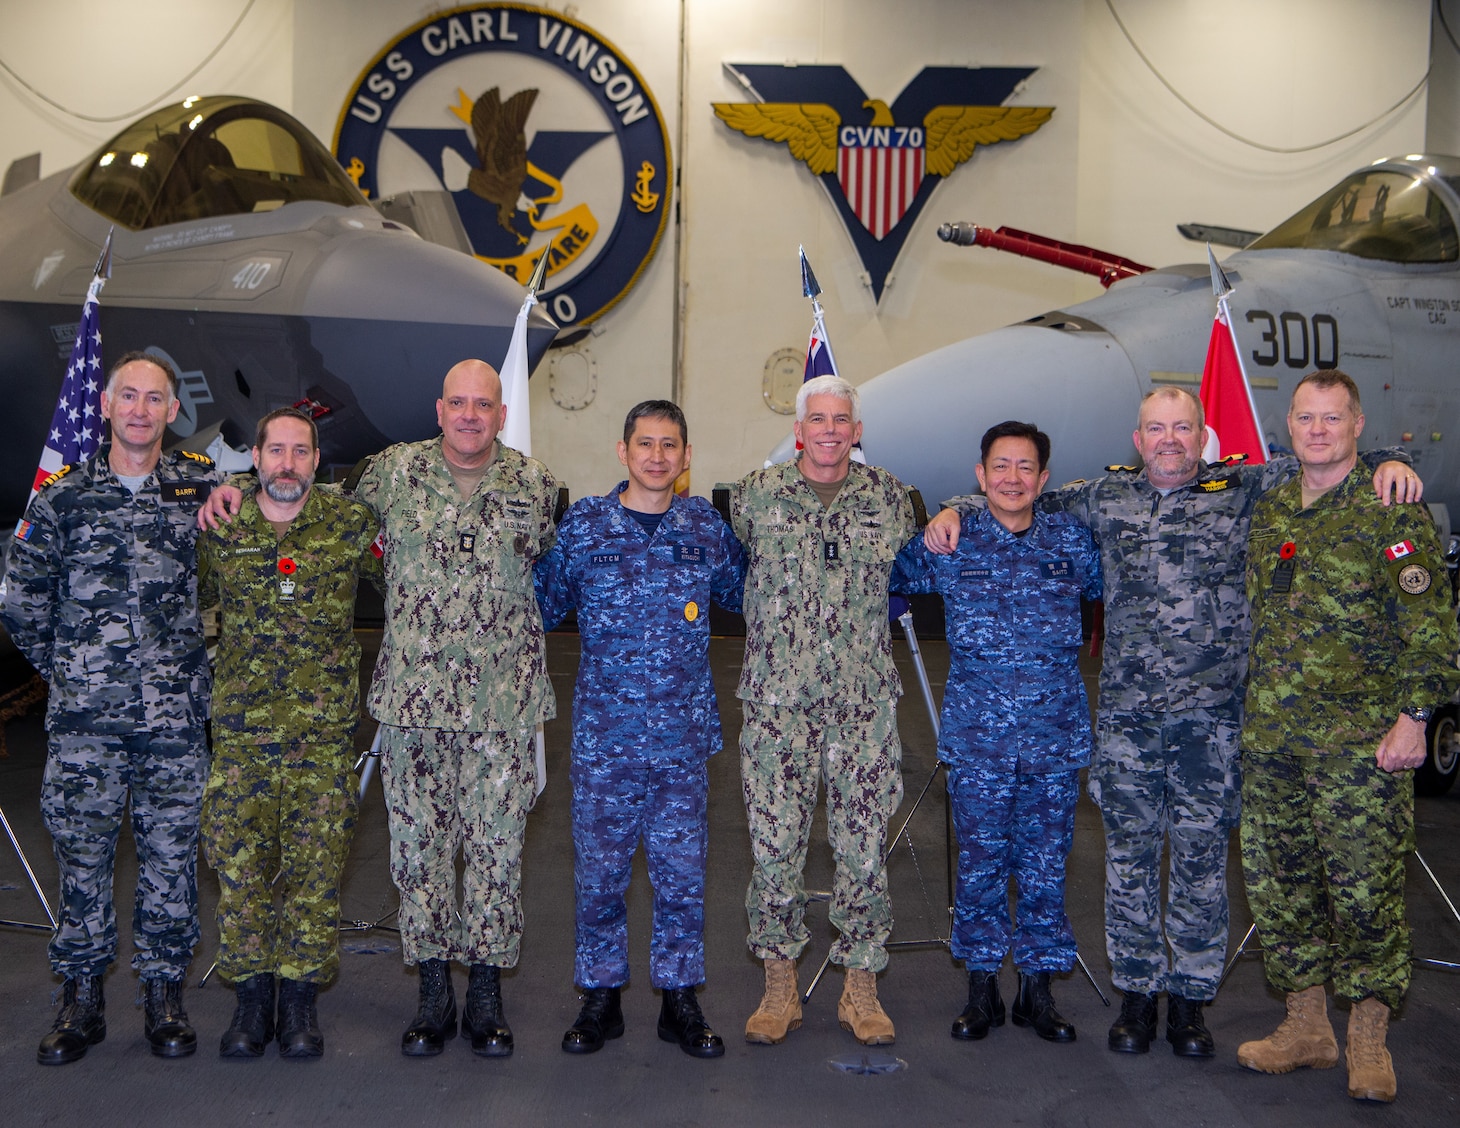 231111-N-GR586-1421 PHILIPPINE SEA (Nov. 11, 2023) Senior leaders from Canada, Australia, Japan and U.S. pose for a photo aboard Nimitz-class aircraft carrier USS Carl Vinson (CVN 70) following a multinational press conference as part of Annual Exercise (ANNUALEX) 2023. ANNUALEX is a multilateral exercise conducted by naval elements of the Royal Australian, Royal Canadian, Japan Maritime Self-Defense Force, and U.S. navies to demonstrate naval interoperability and a joint commitment to a free and open Indo-Pacific. Vinson, flagship of Carrier Strike Group (CSG) ONE, is deployed to the U.S. 7th Fleet area of operations in support of a free and open Indo-Pacific. (U.S. Navy photo by Mass Communication Specialist 2nd Class Benjamin Ringers)